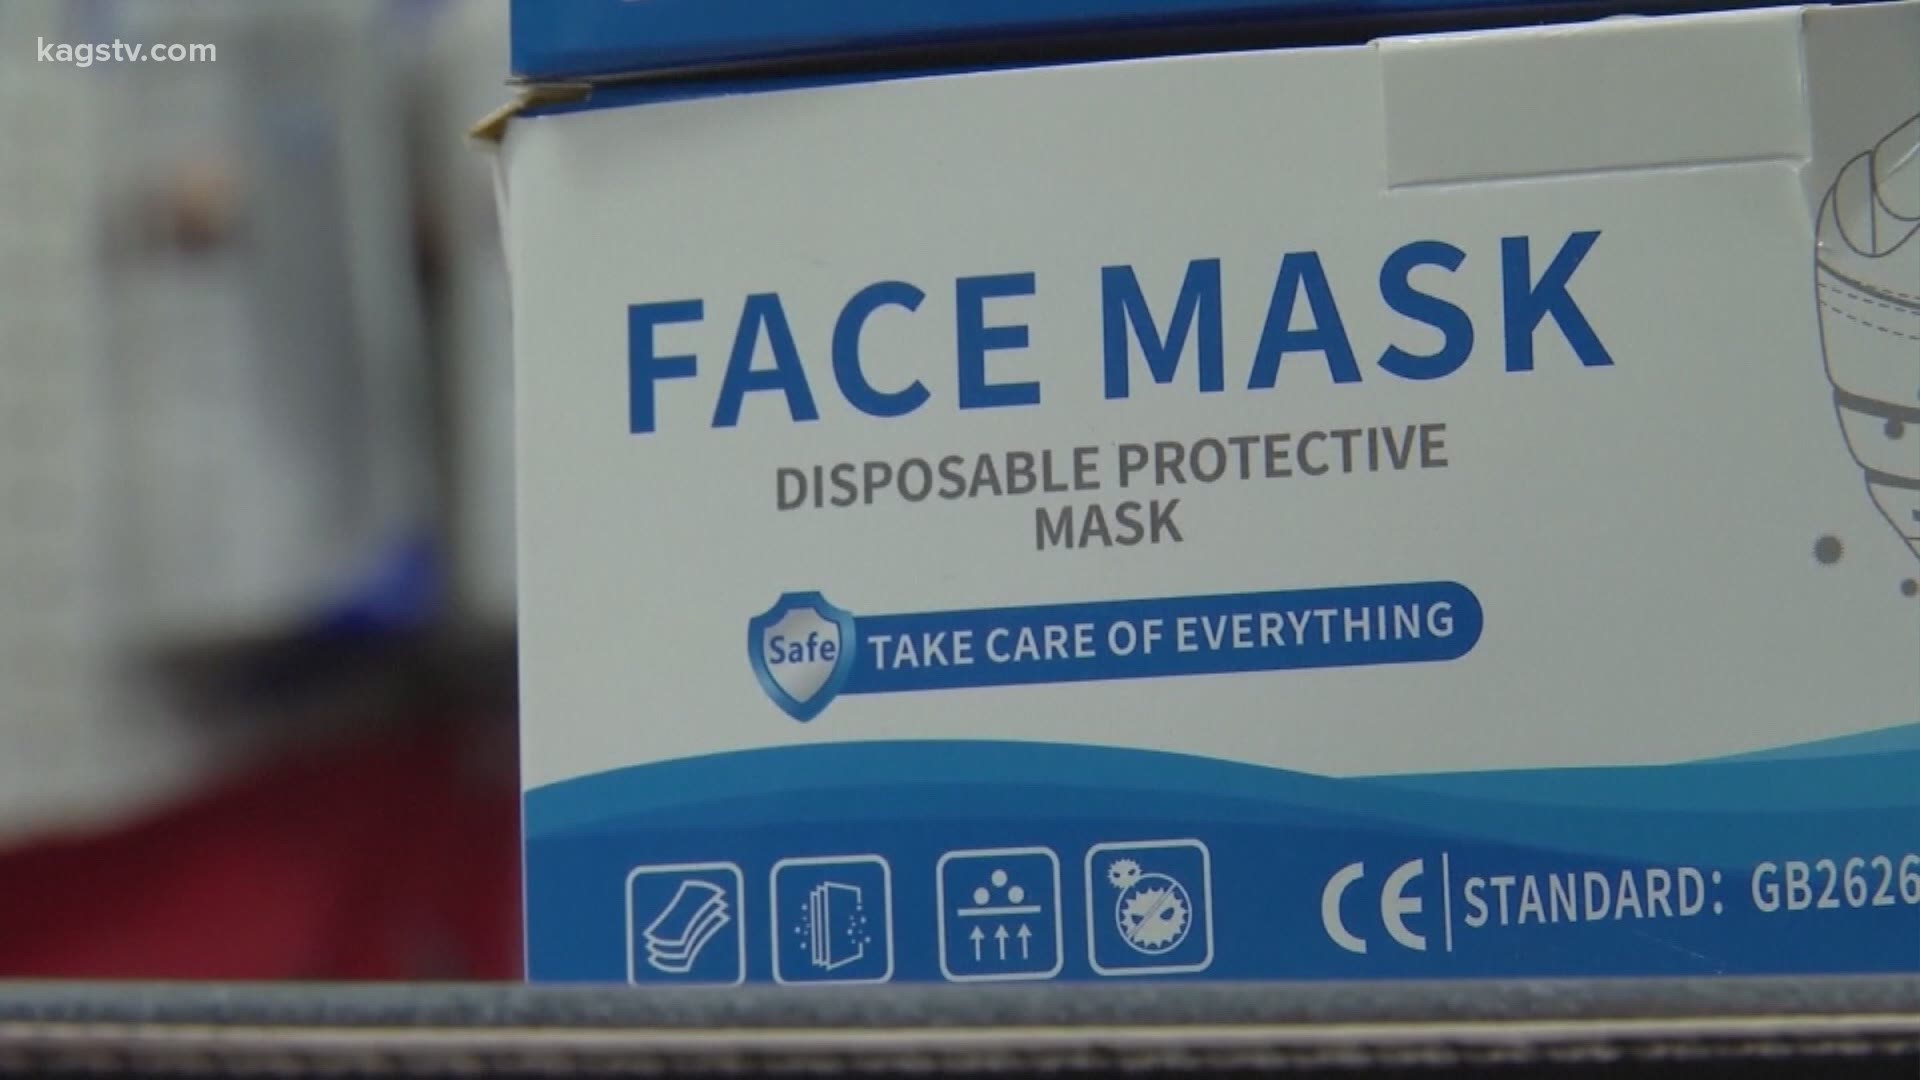 Protect yourself and others, wear the proper face mask